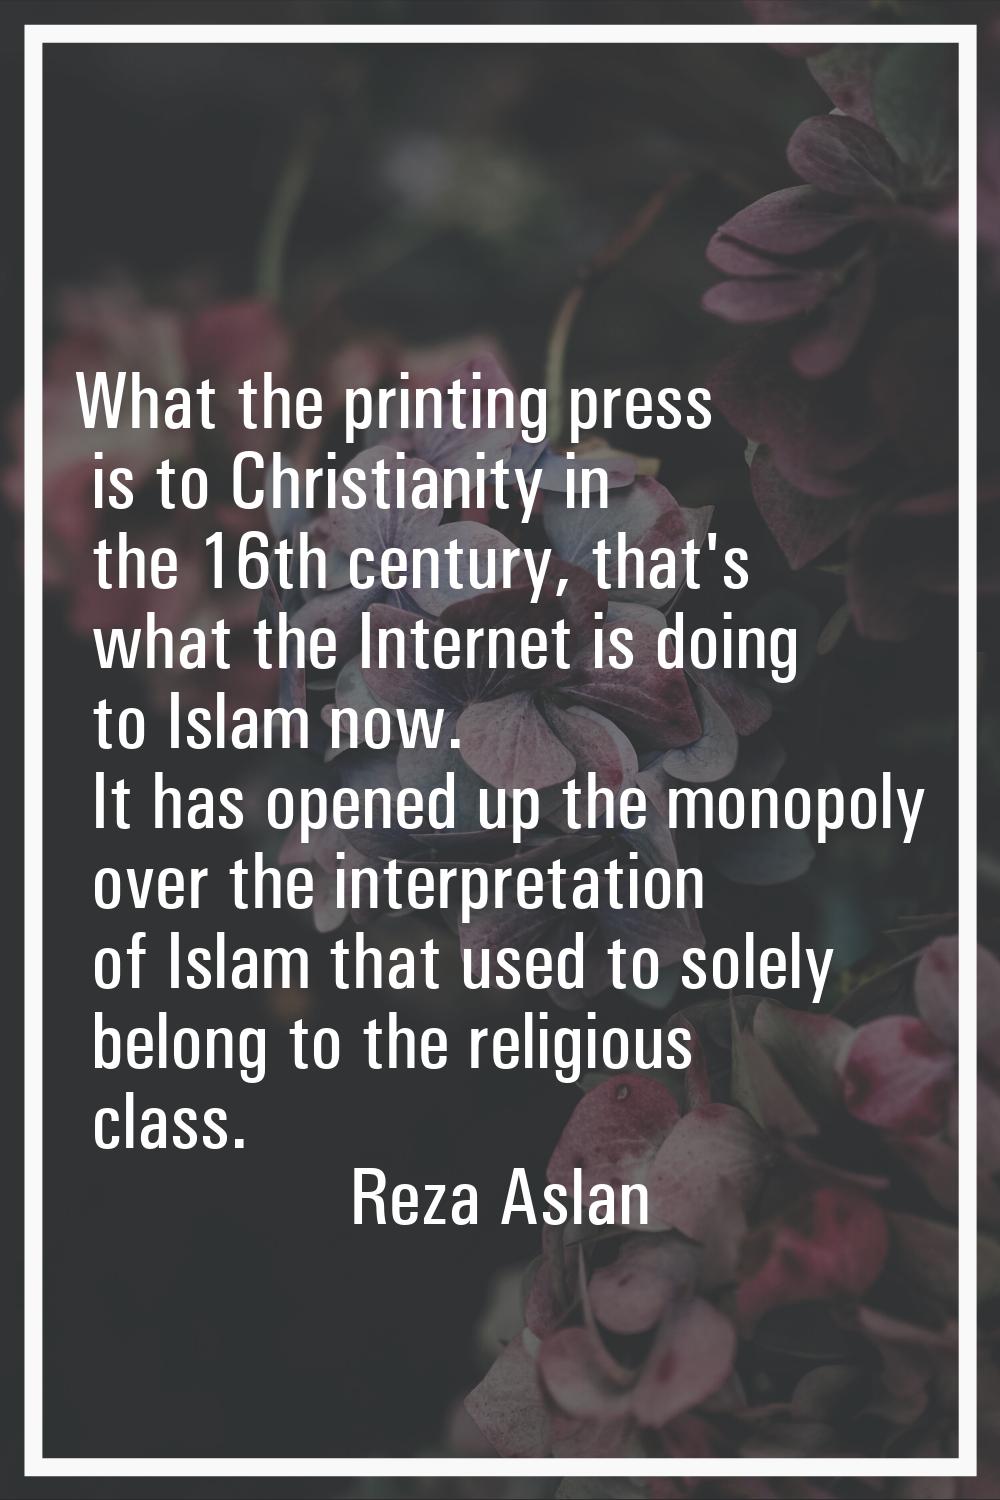 What the printing press is to Christianity in the 16th century, that's what the Internet is doing t